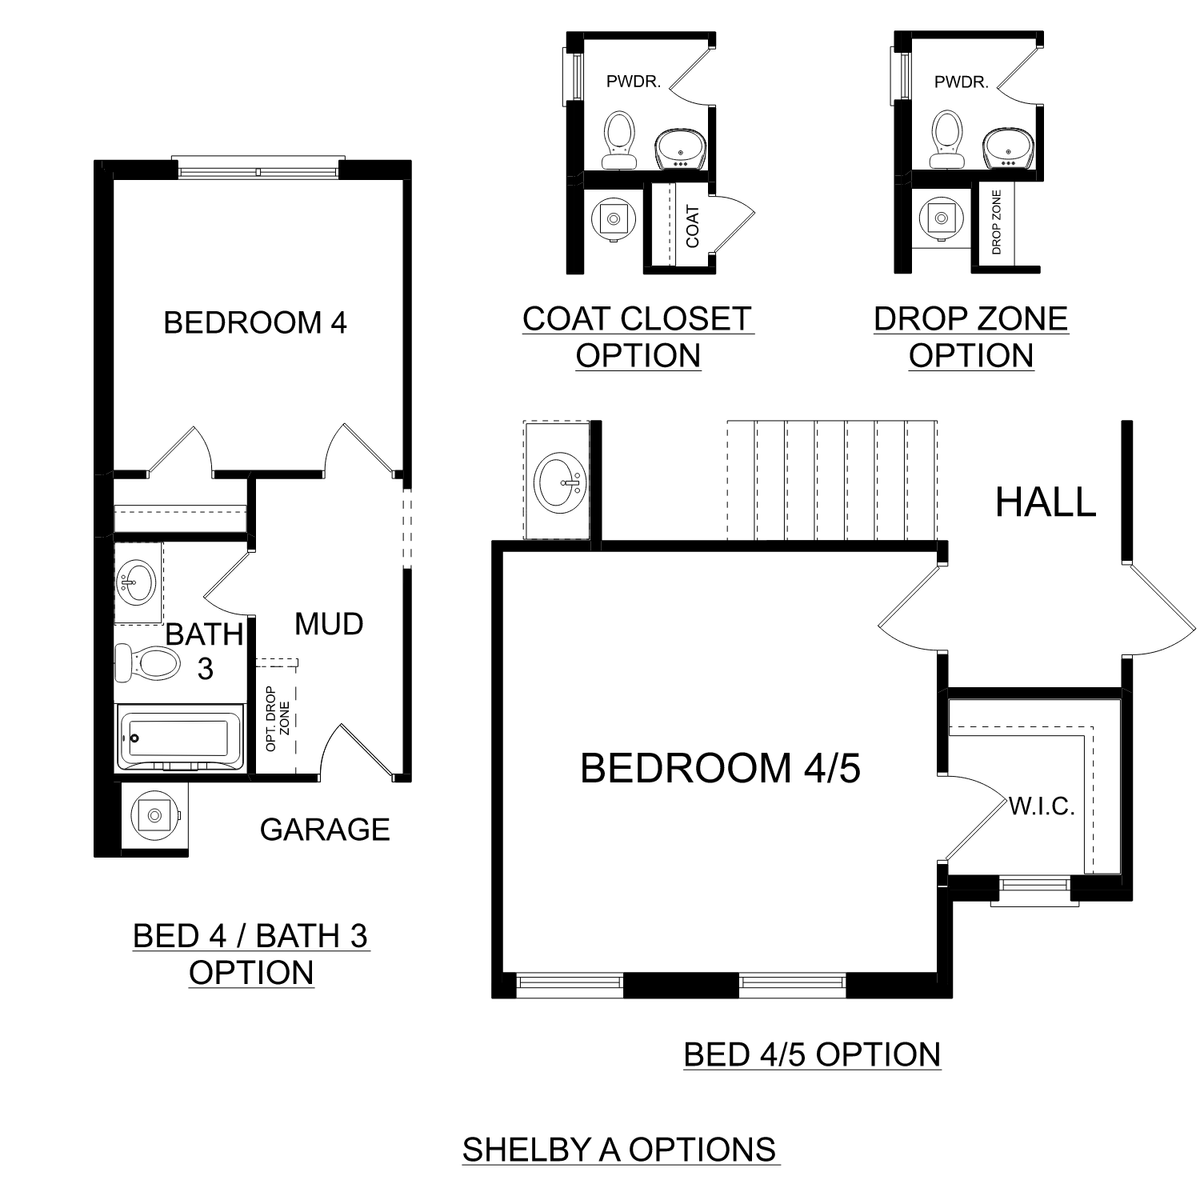 3 - The Shelby buildable floor plan layout in Davidson Homes' Walker's Hill community.